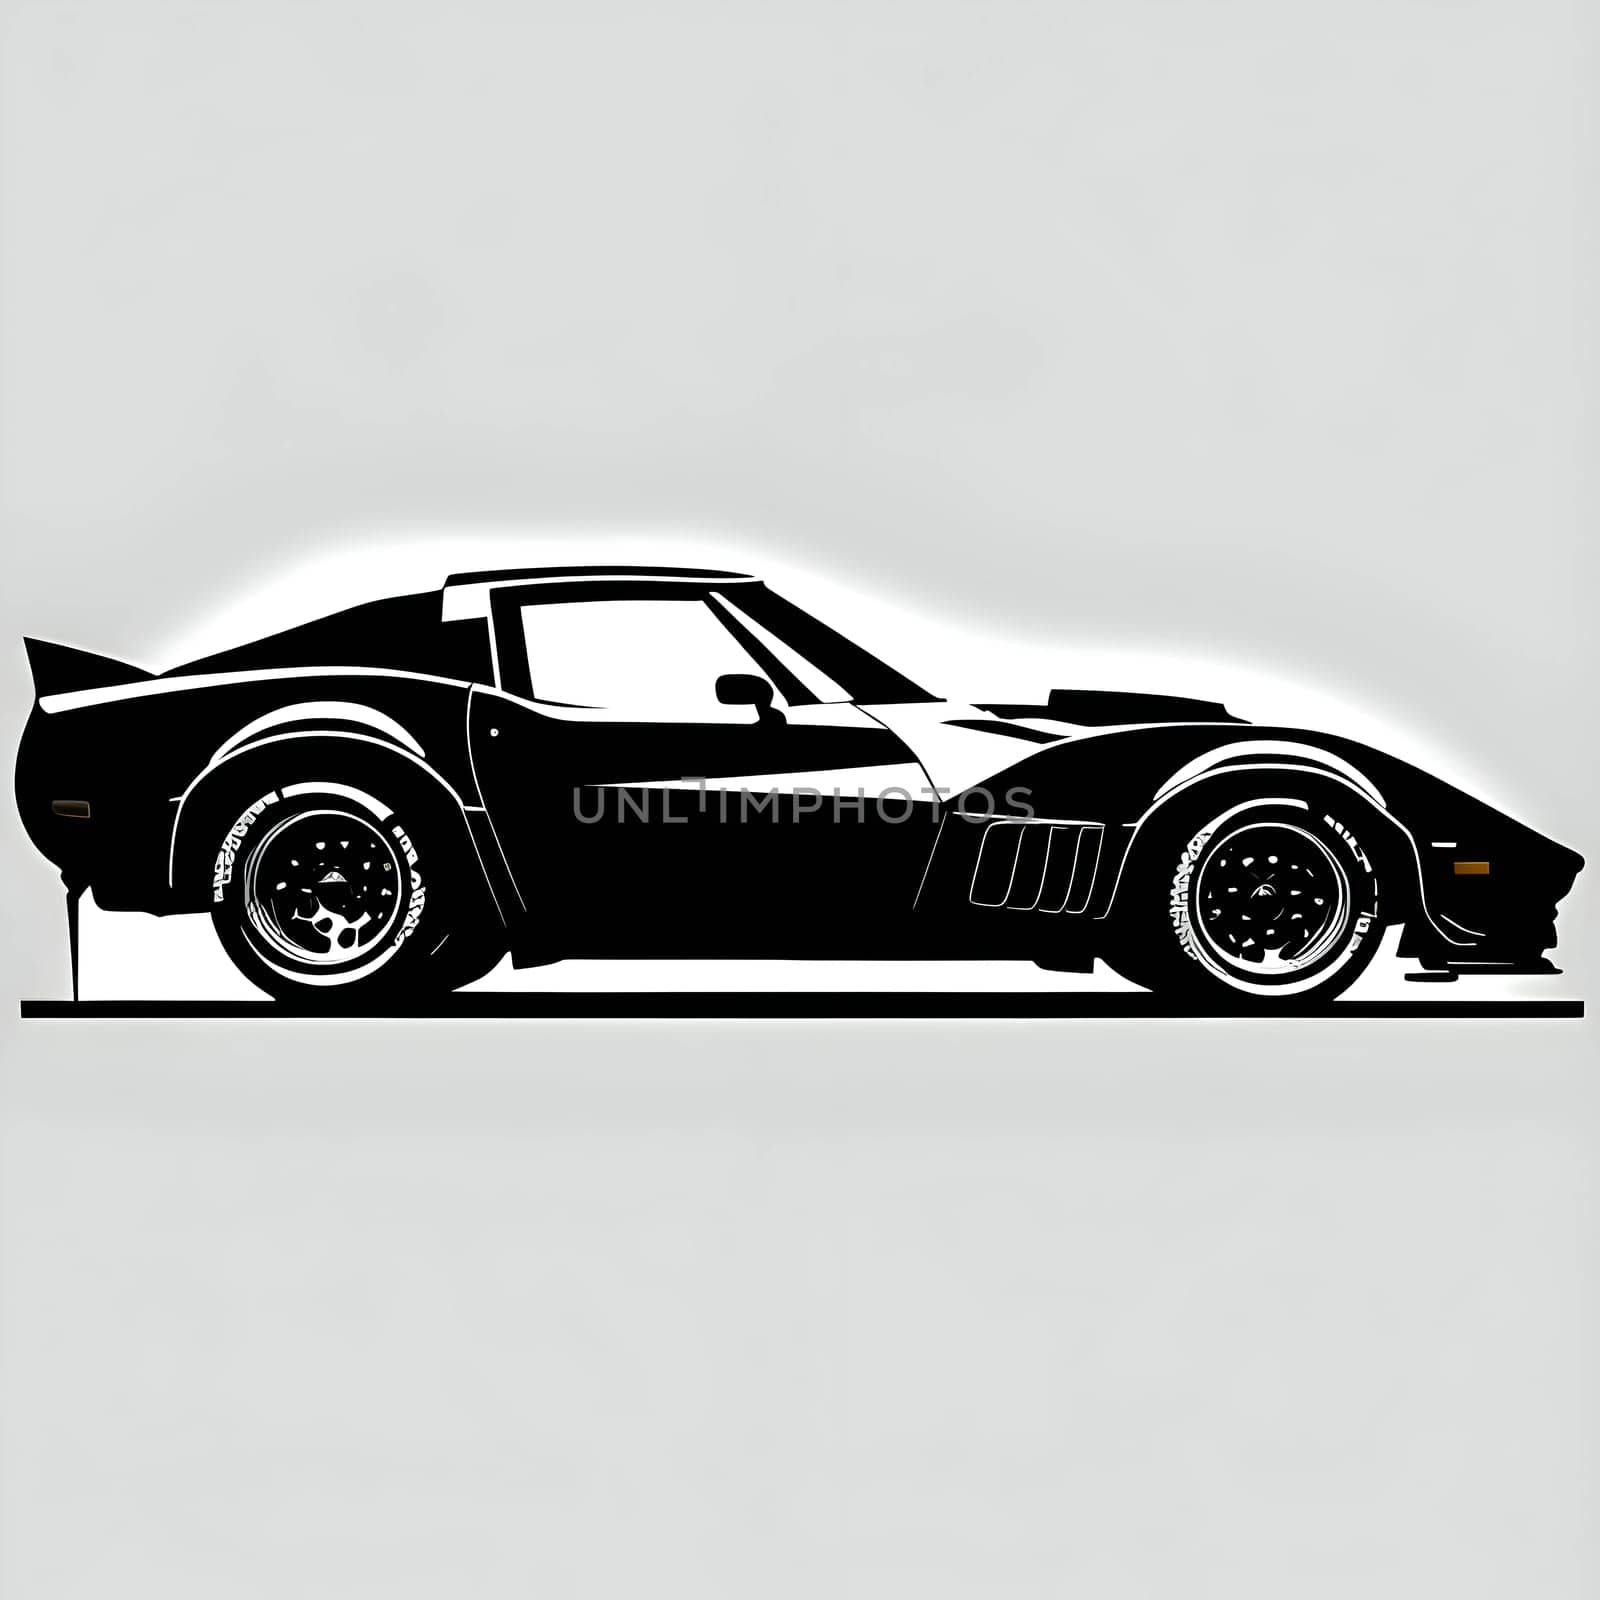 Vector illustration of a car in black silhouette against a clean white background, capturing graceful forms.